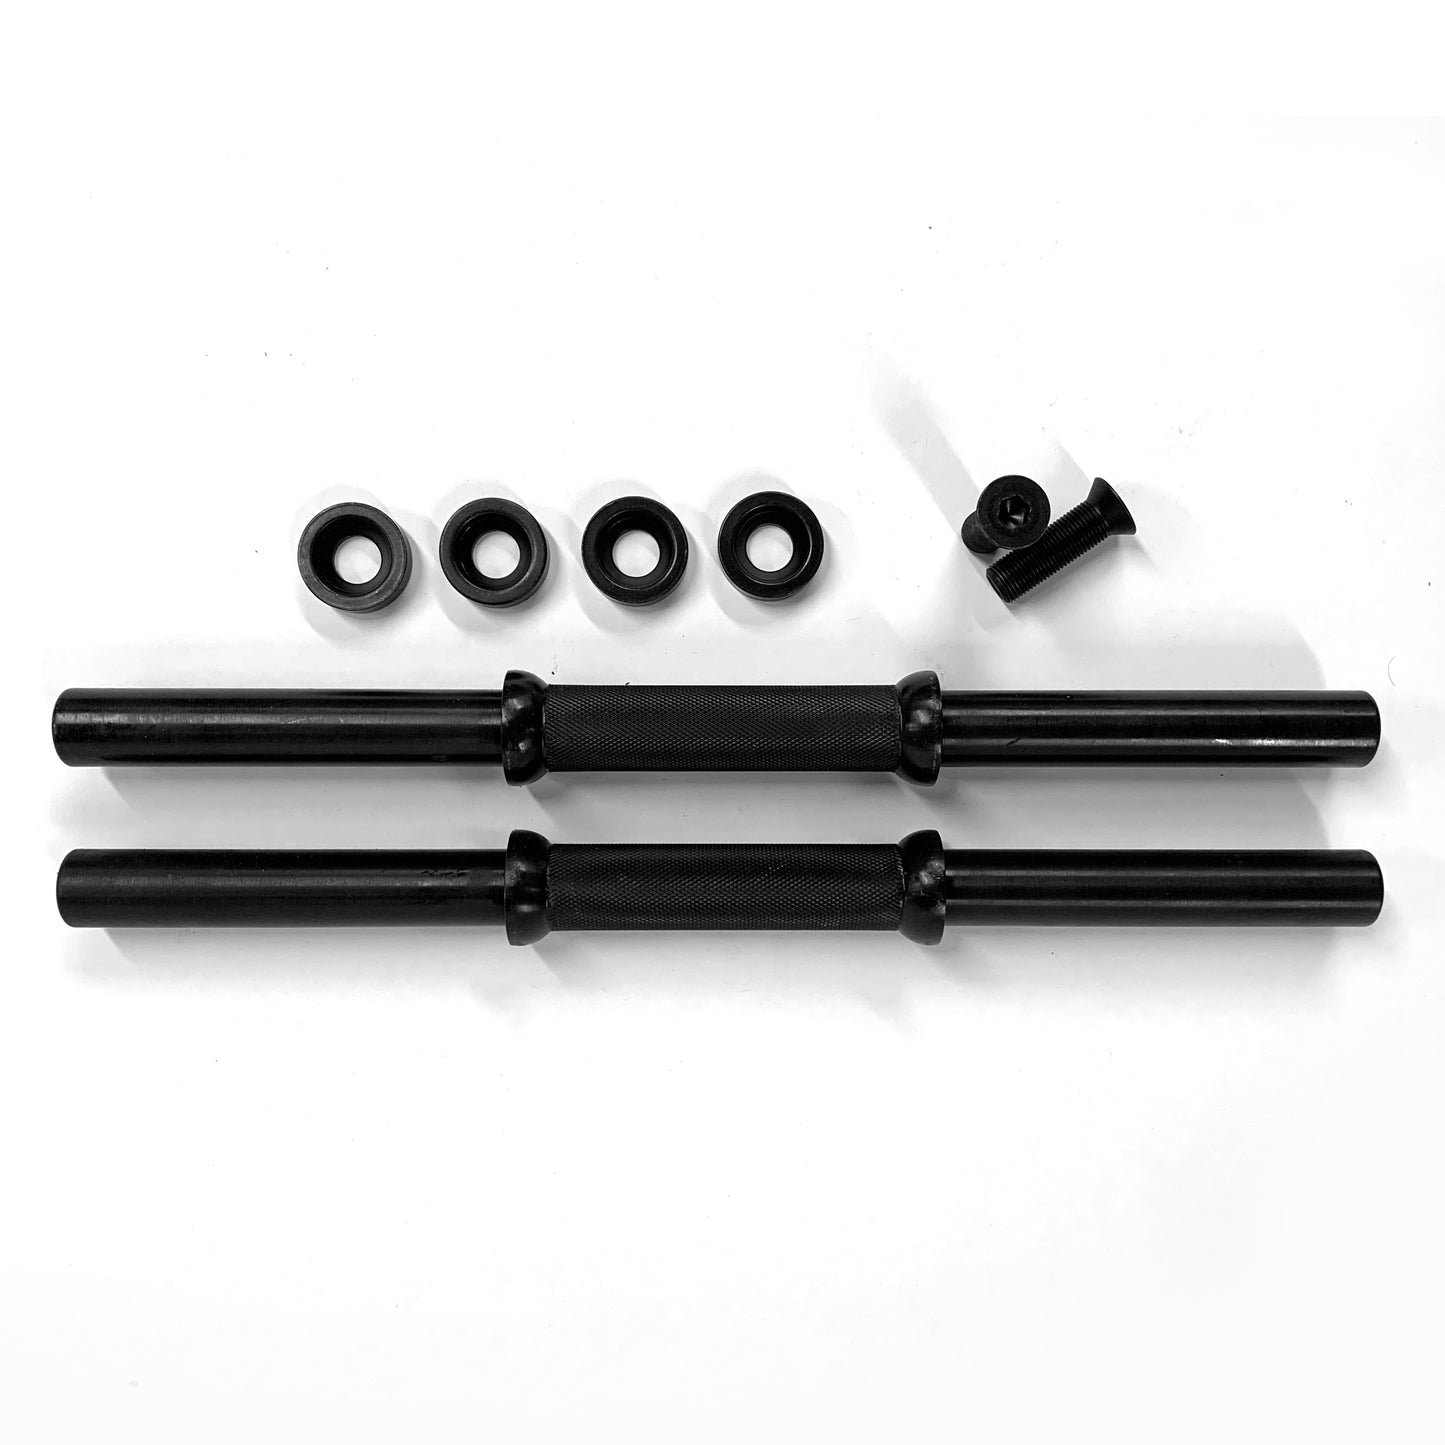 IVANKO 30MM Black Dumbbell Handles, Pair, Discontinued stock.